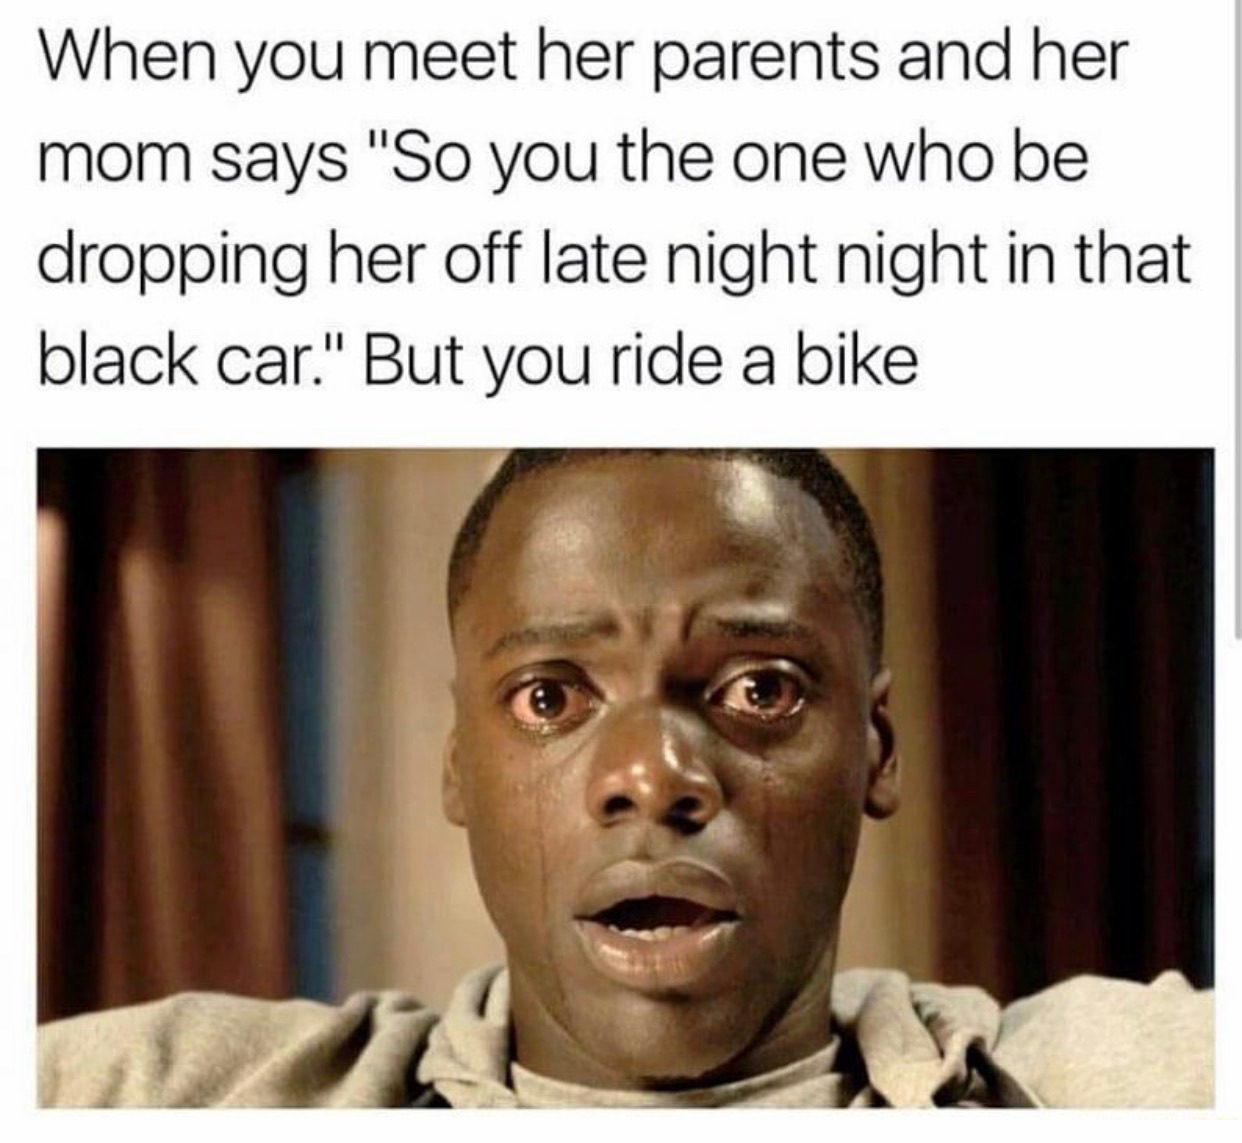 late night meme - When you meet her parents and her mom says "So you the one who be dropping her off late night night in that black car." But you ride a bike